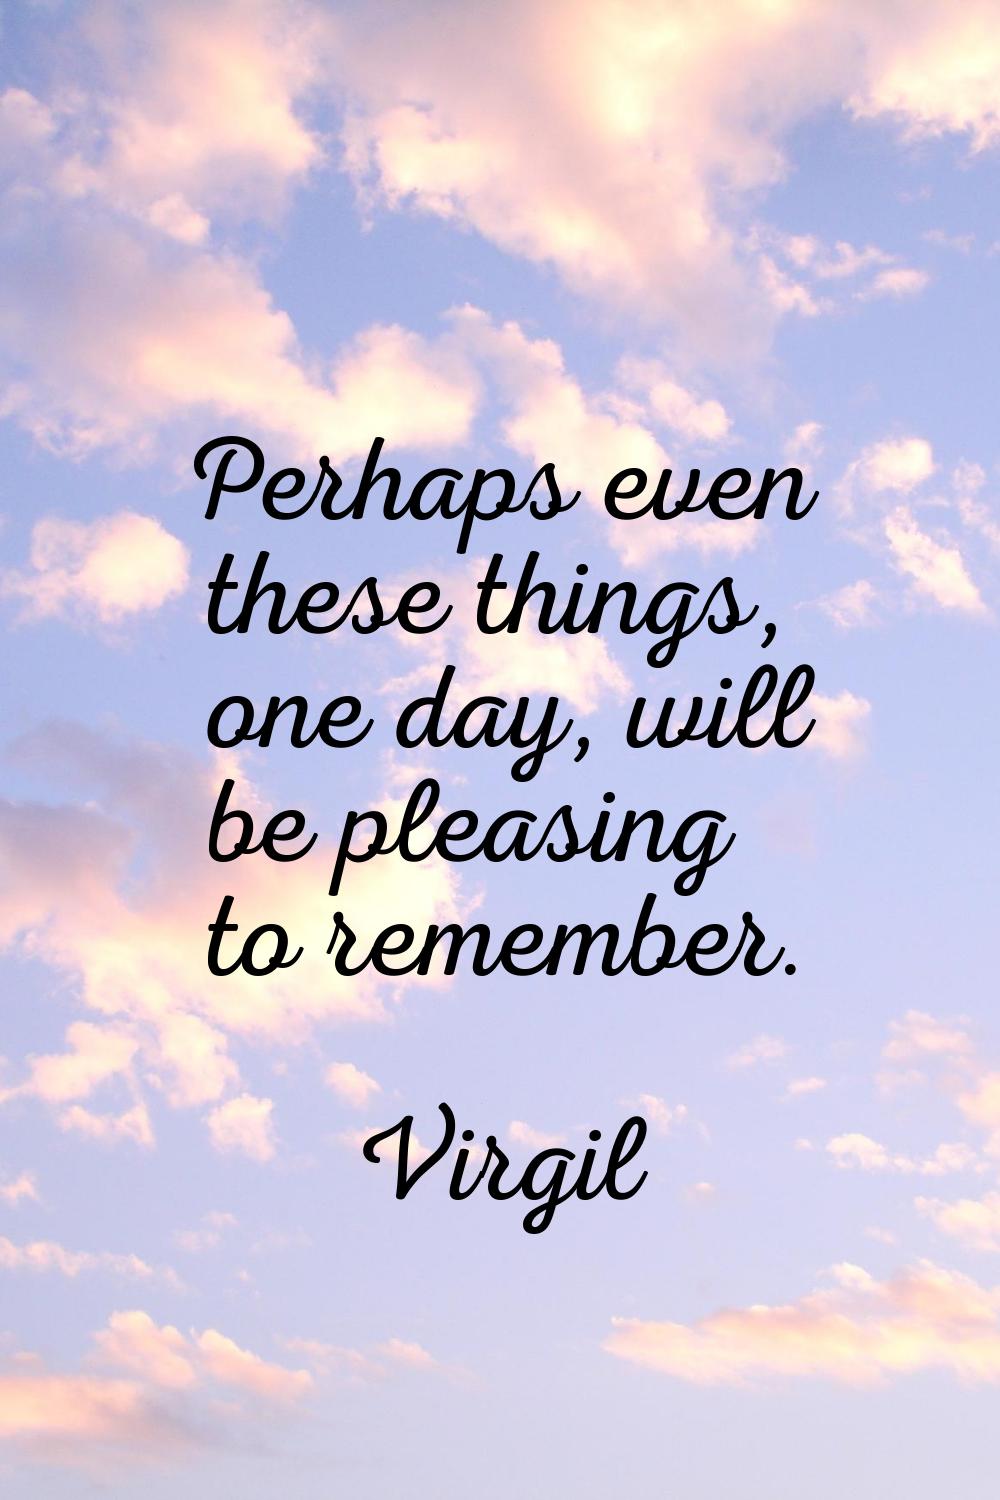 Perhaps even these things, one day, will be pleasing to remember.